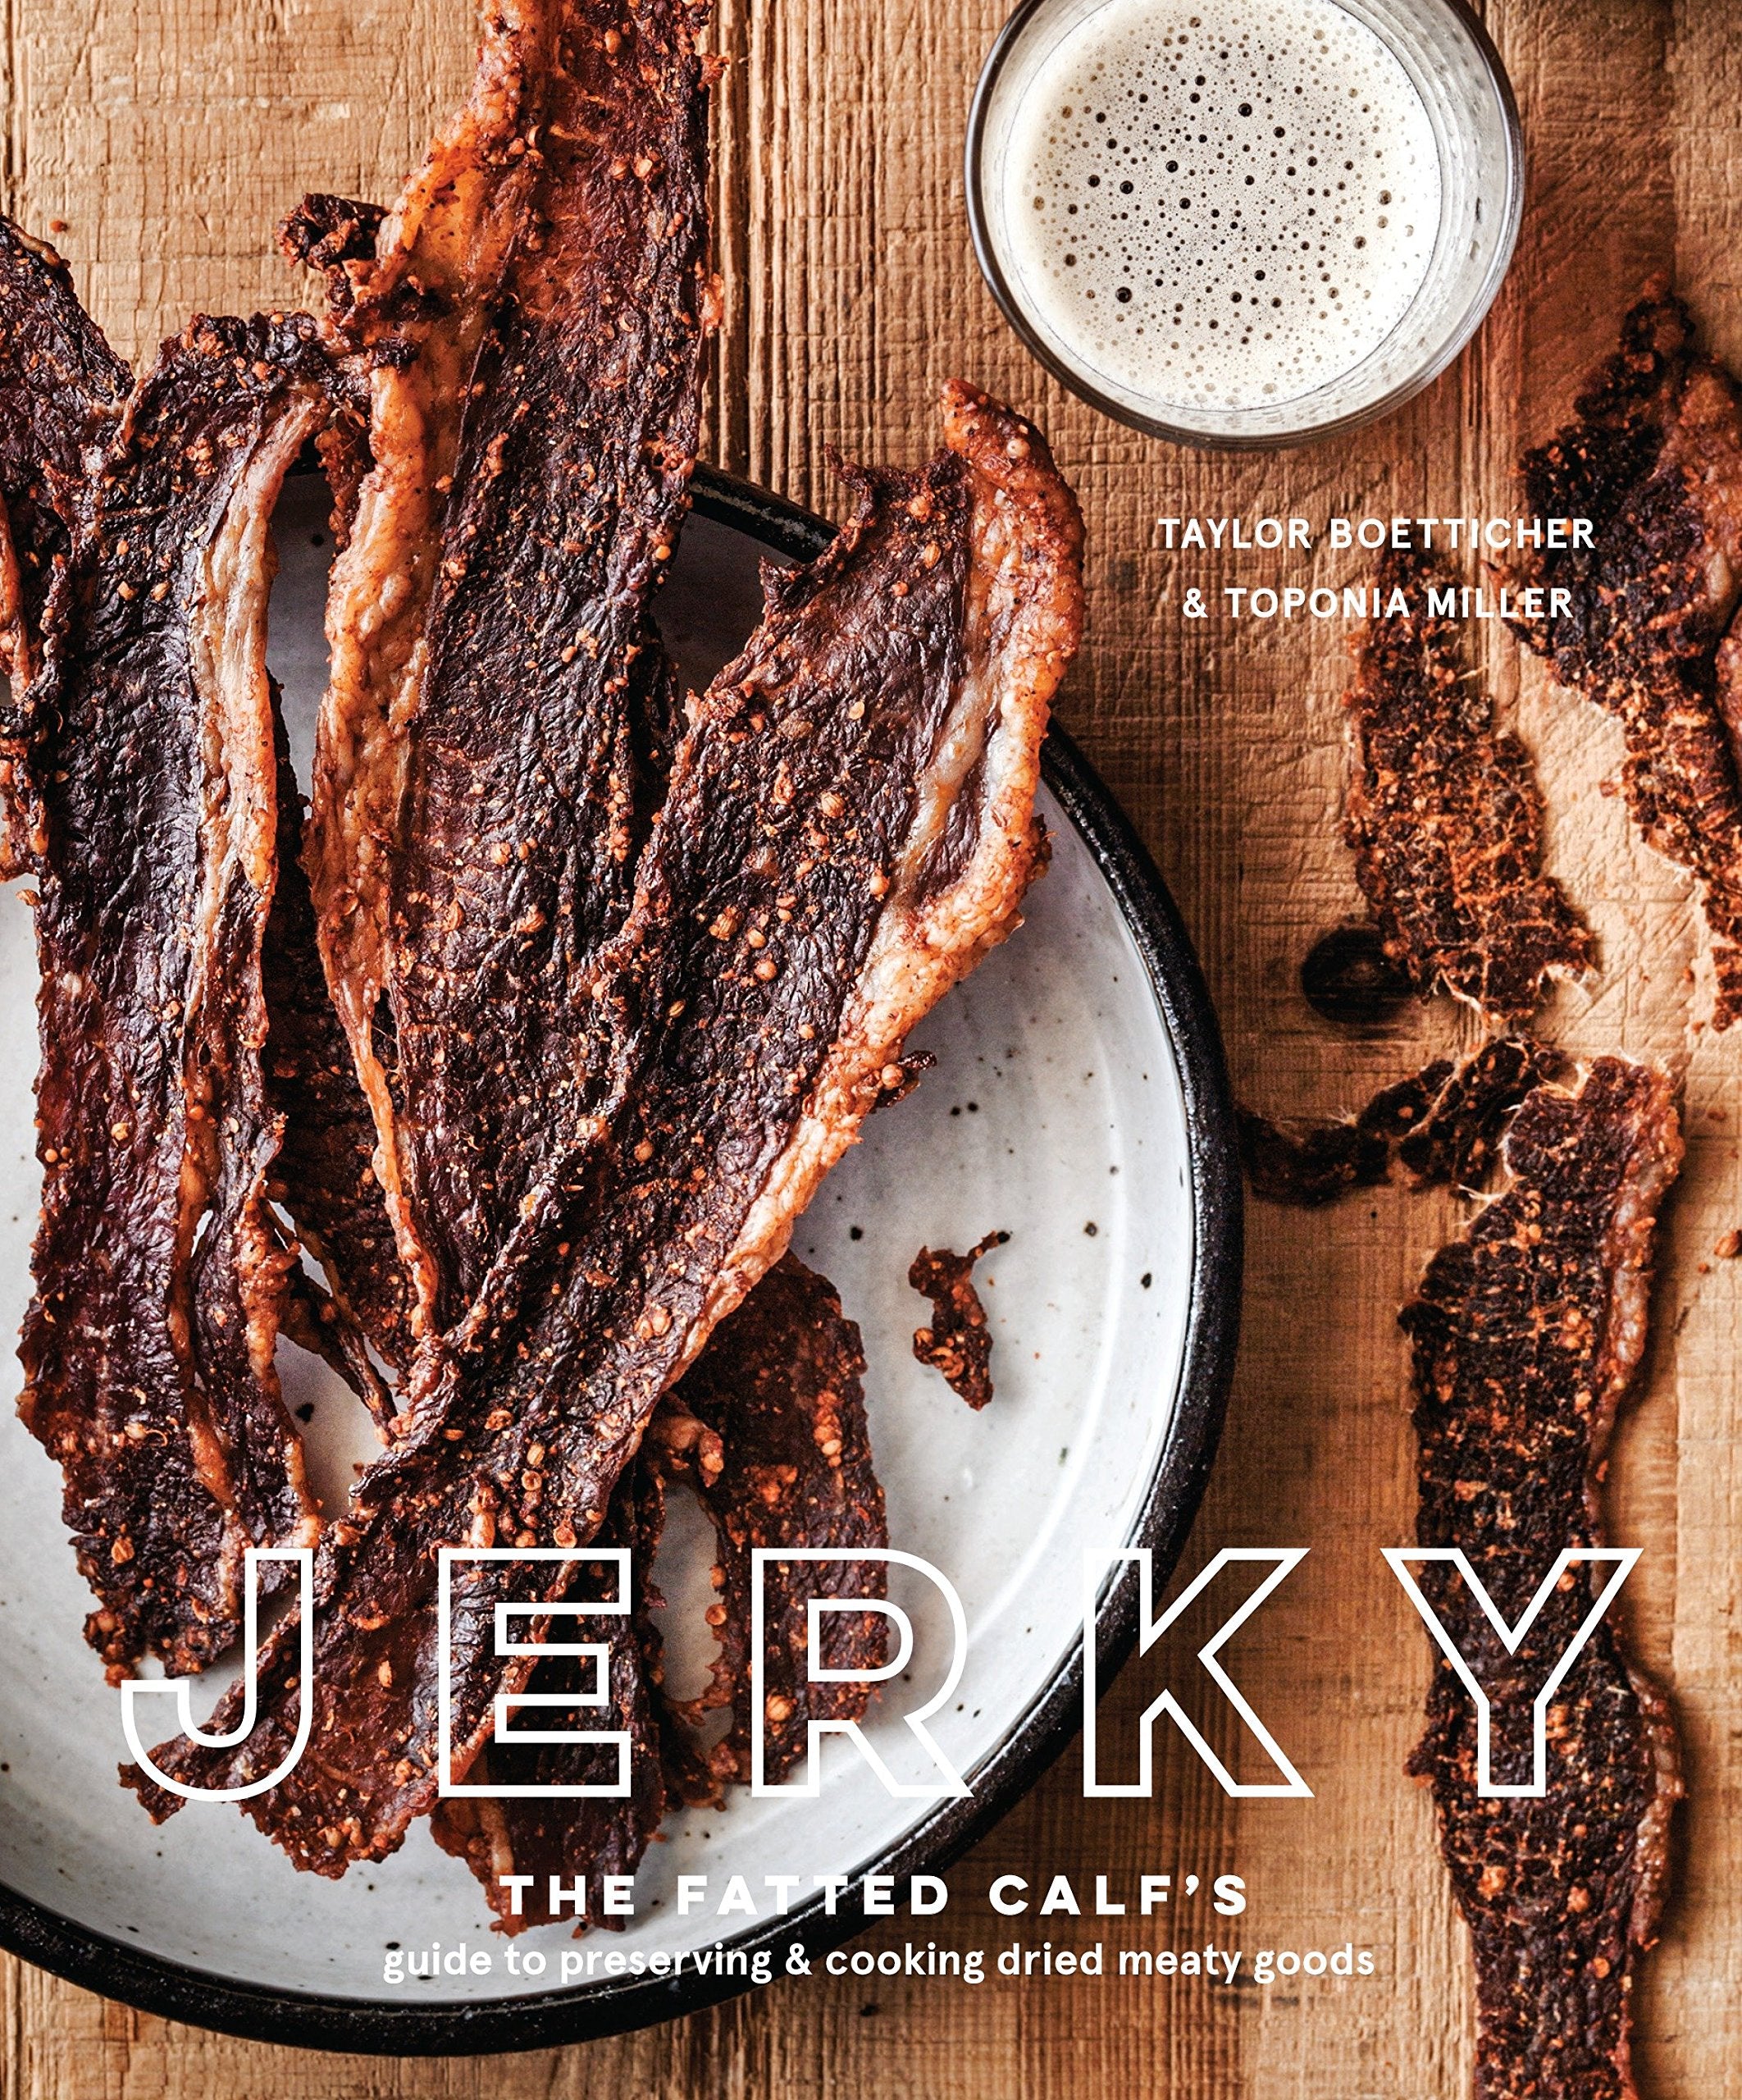 Jerky: The Fatted Calf's Guide to Preserving and Cooking Dried Meaty Goods (Taylor Boetticher, Toponia Miller)